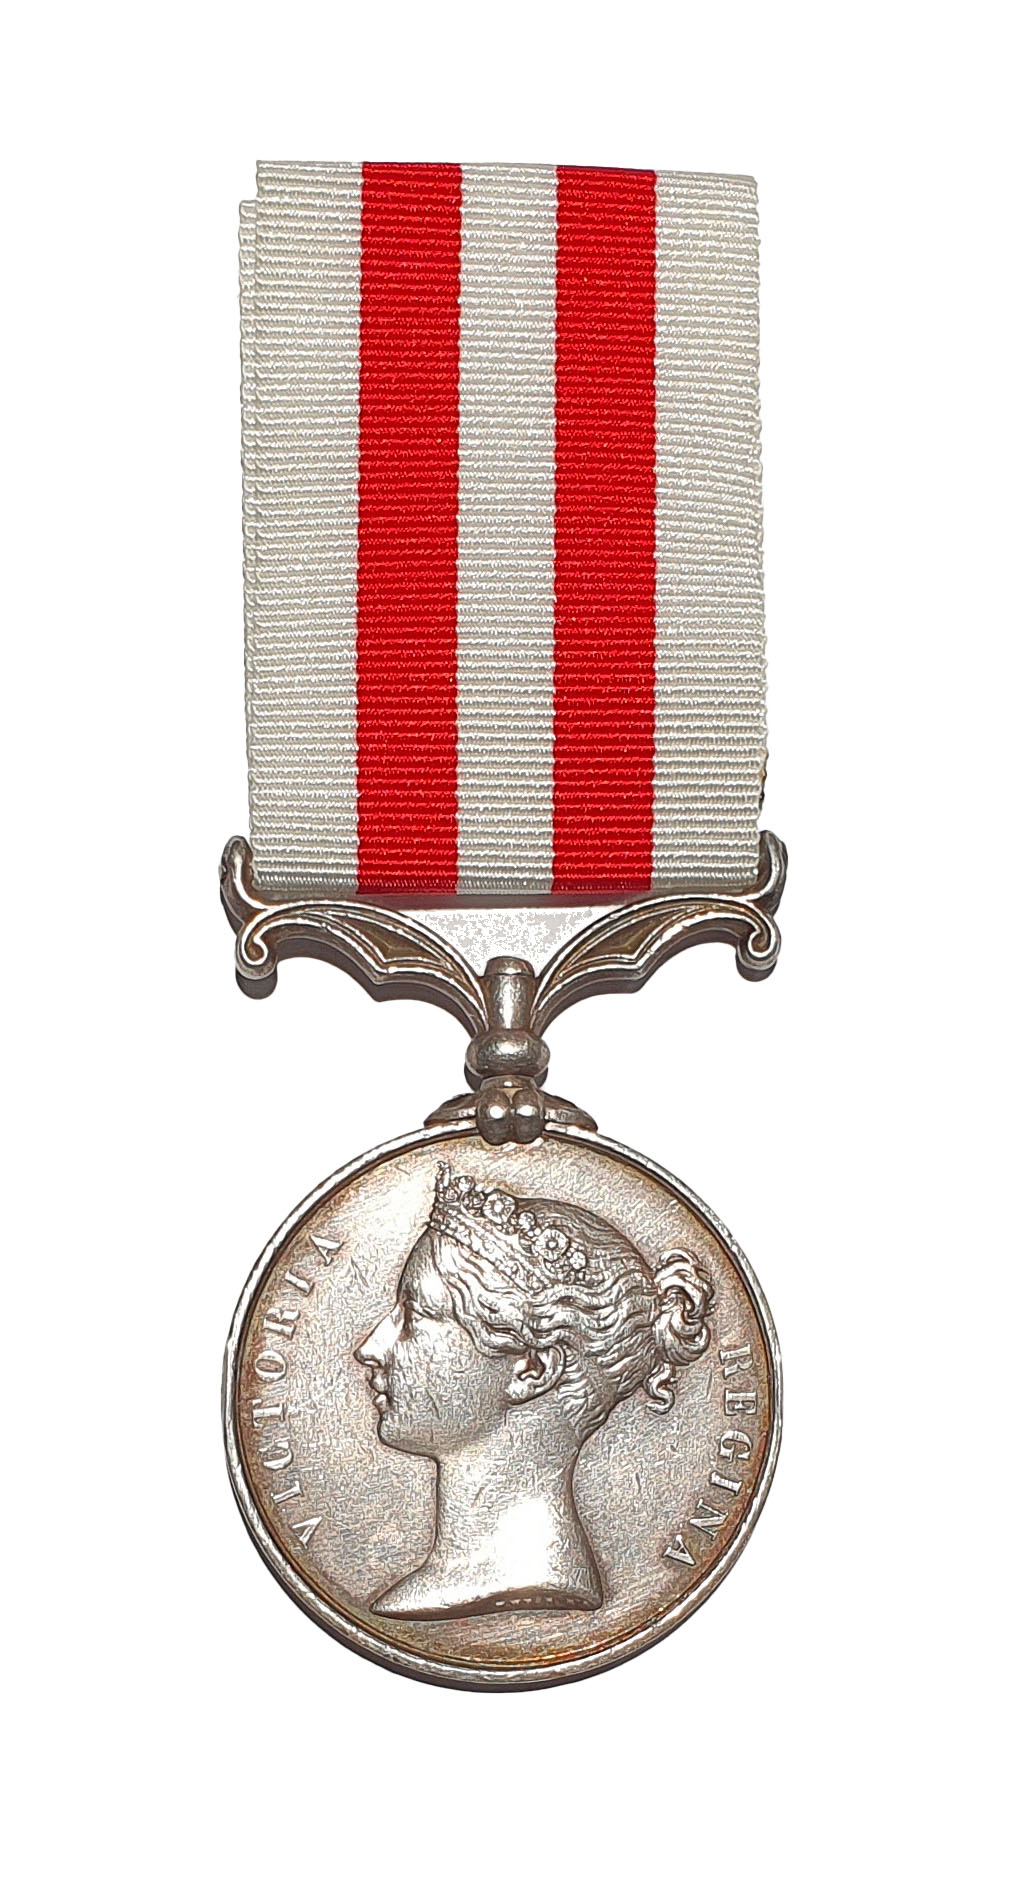 Indian Mutiny Medal, 1857-58. No clasp, awarded to Sergeant (??) Burchell